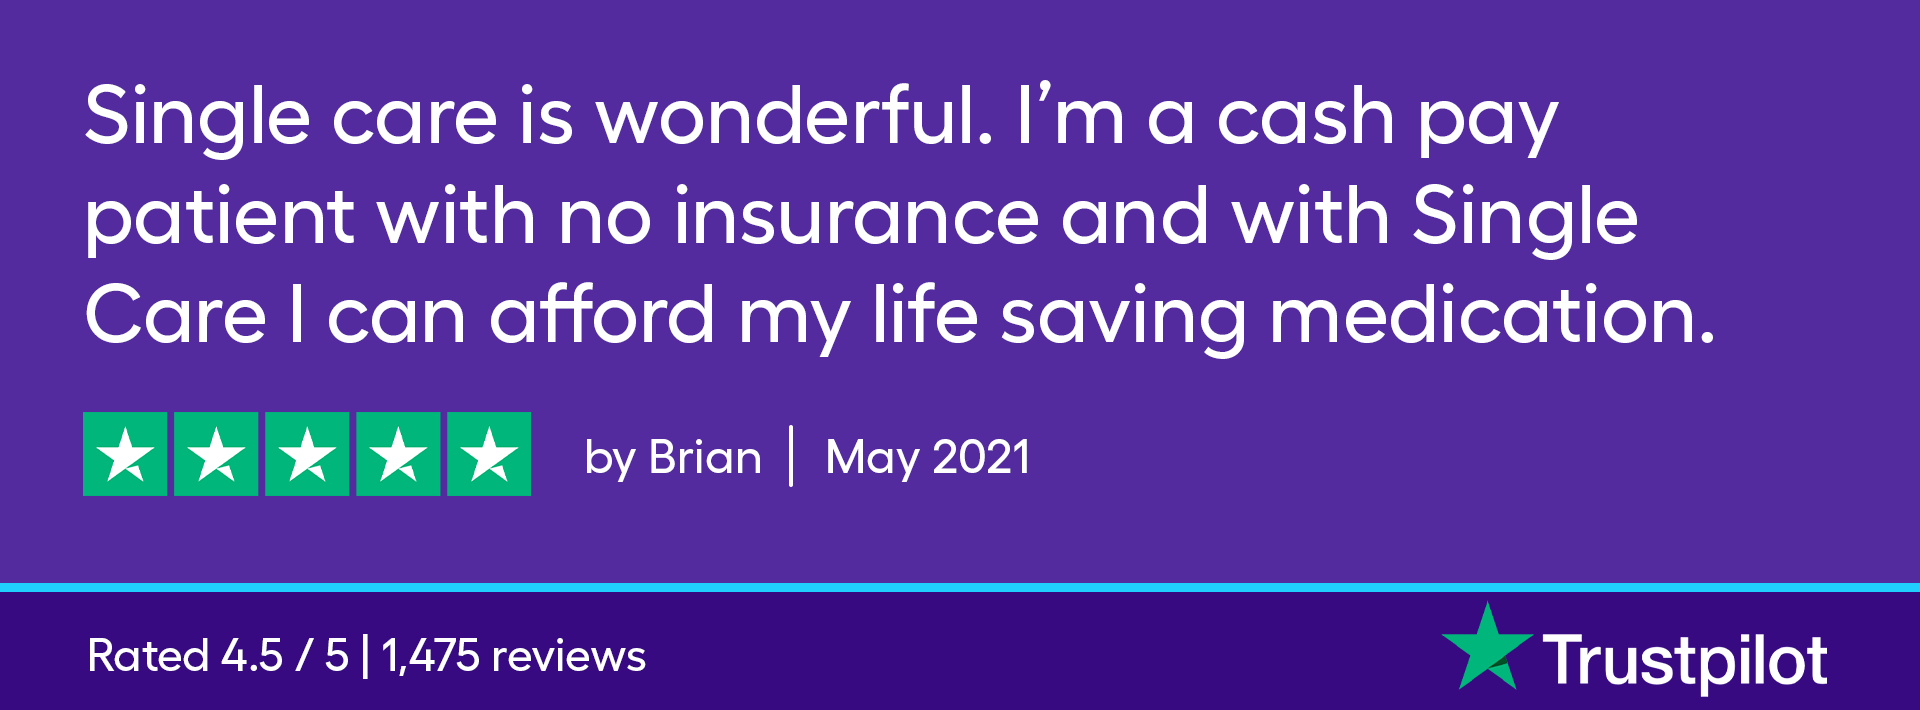 SingleCare is wonderful. I'm a cash pay patient with no insurance, and with SingleCare I can afford my life-saving medication.